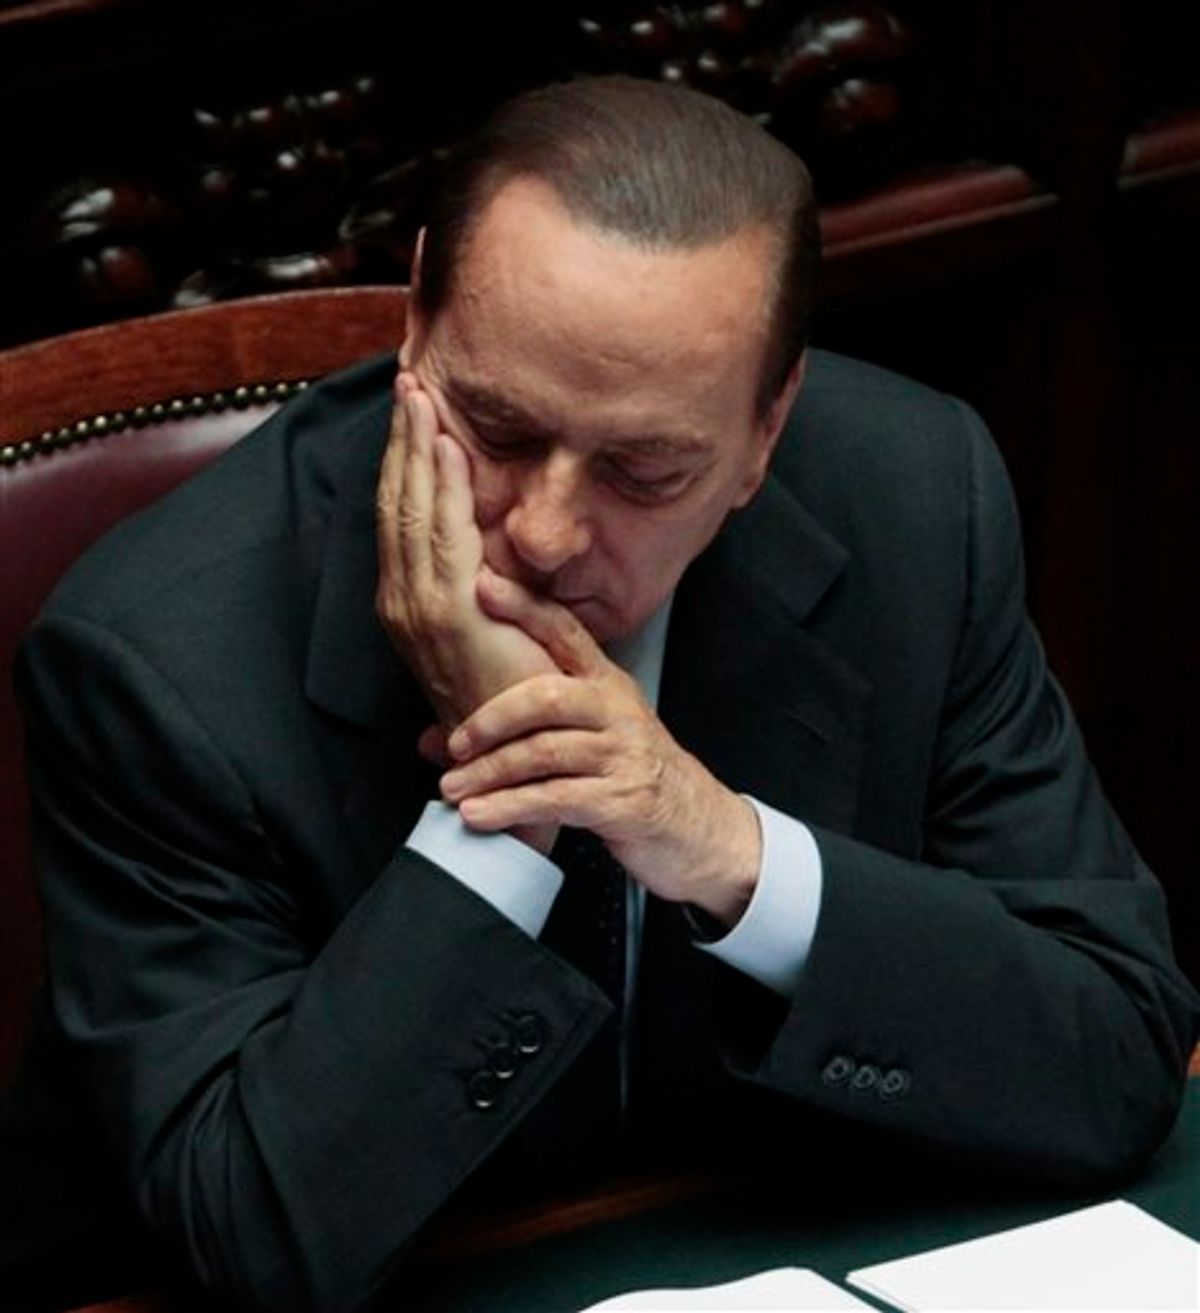 Italian Premier Silvio Berlusconi reacts prior to the start of a voting session in Parliament  on the Government's austerity package in Rome, Wednesday, Sept. 14, 2011.  Demonstrators, some armed with smoke bombs, clashed with police in Rome near Parliament on Wednesday night as Italian lawmakers prepared to cast a final vote on a package of new taxes and spending cuts designed to fend off a financial crisis threatening much of Europe. (AP Photo/Gregorio Borgia) (AP)